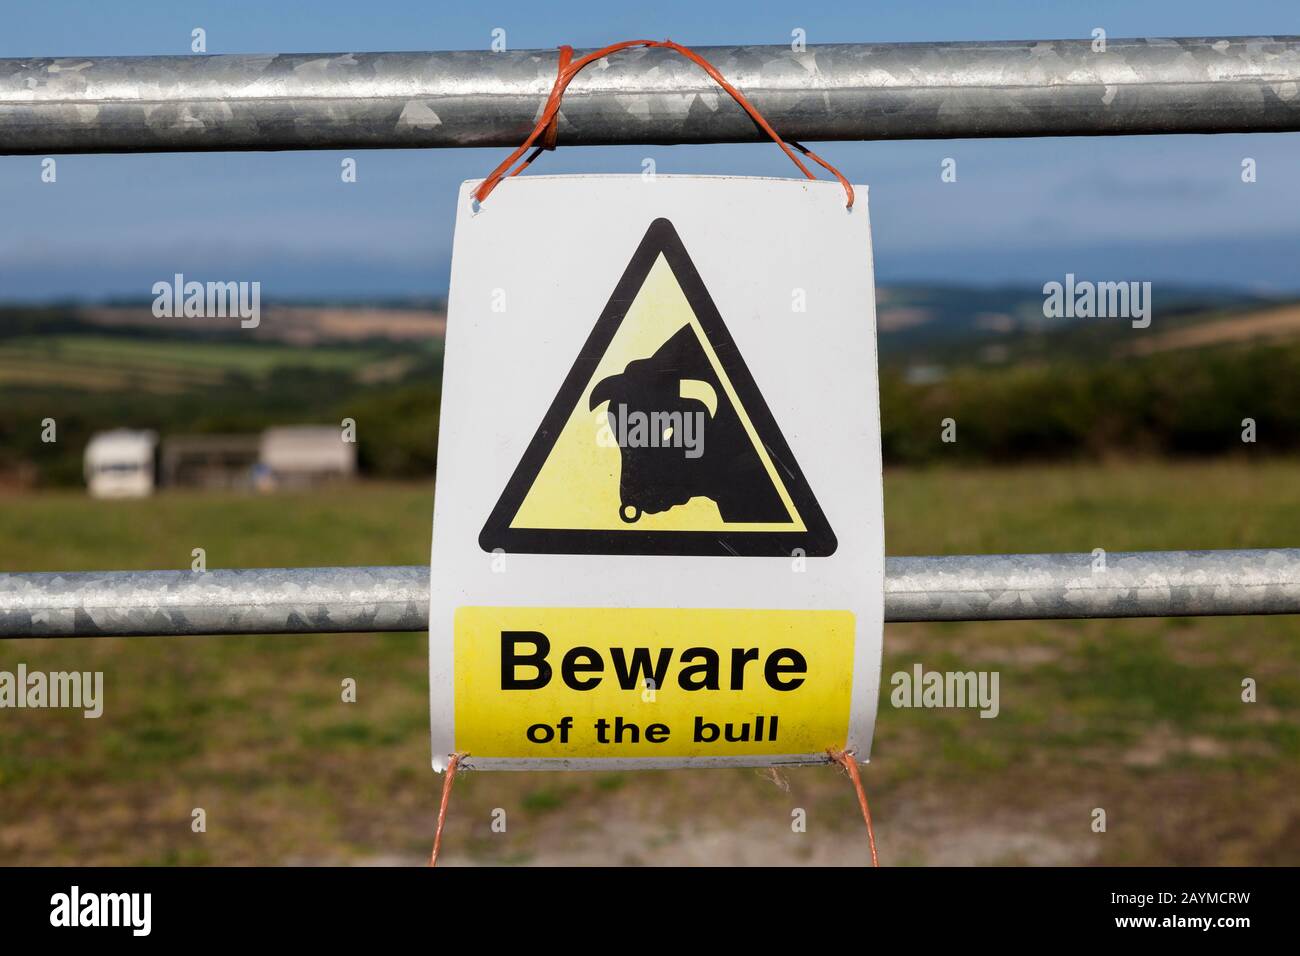 A Beware of the Bull warning sign on a farm in the U.K. Stock Photo